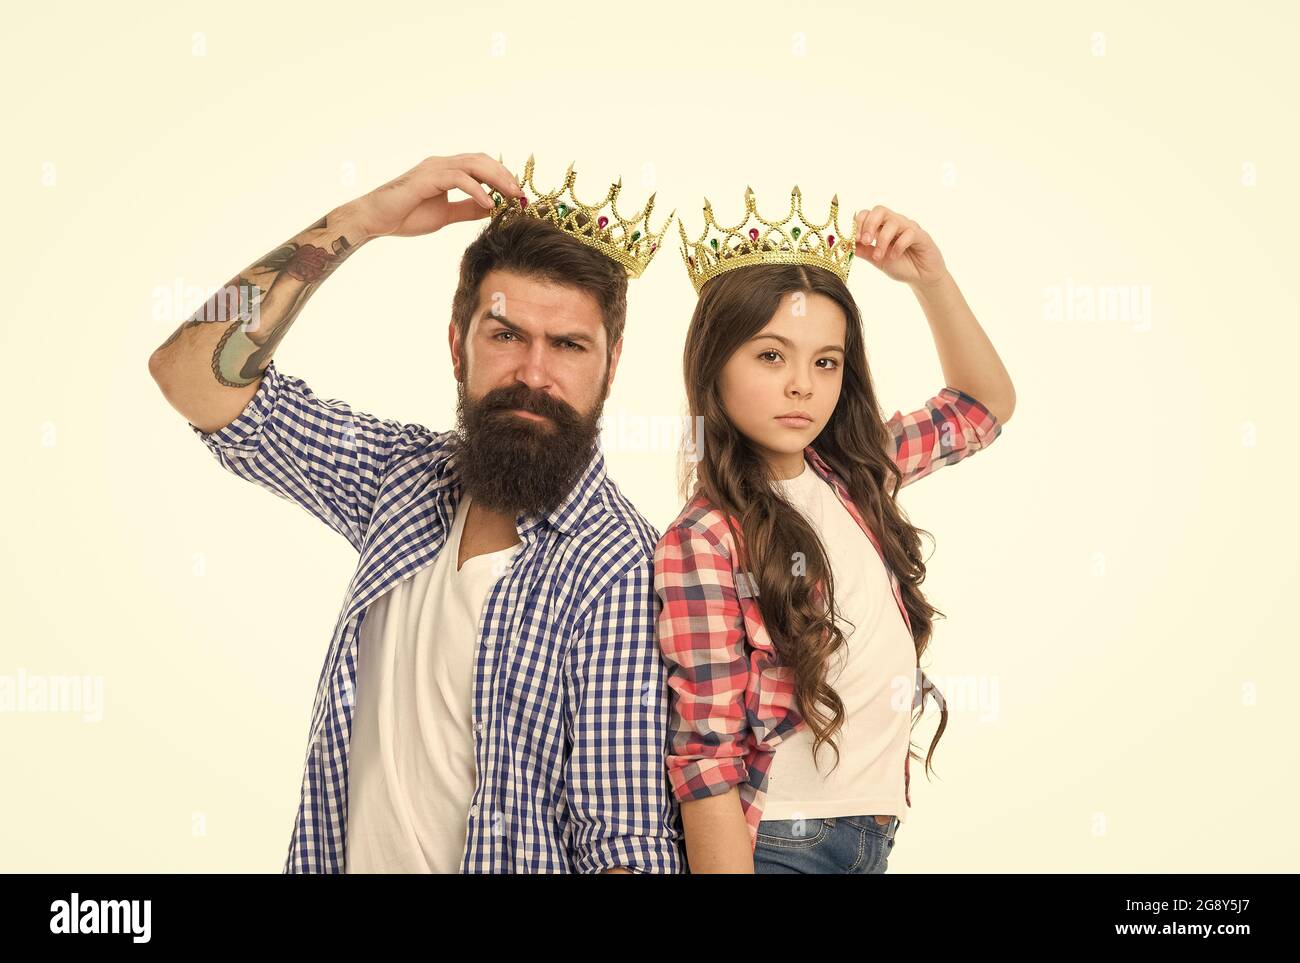 Are you going to prom. Prom king and young queen. Small child and bearded man hold prom crowns. Coronation party. Holiday celebration. Pride and glory Stock Photo